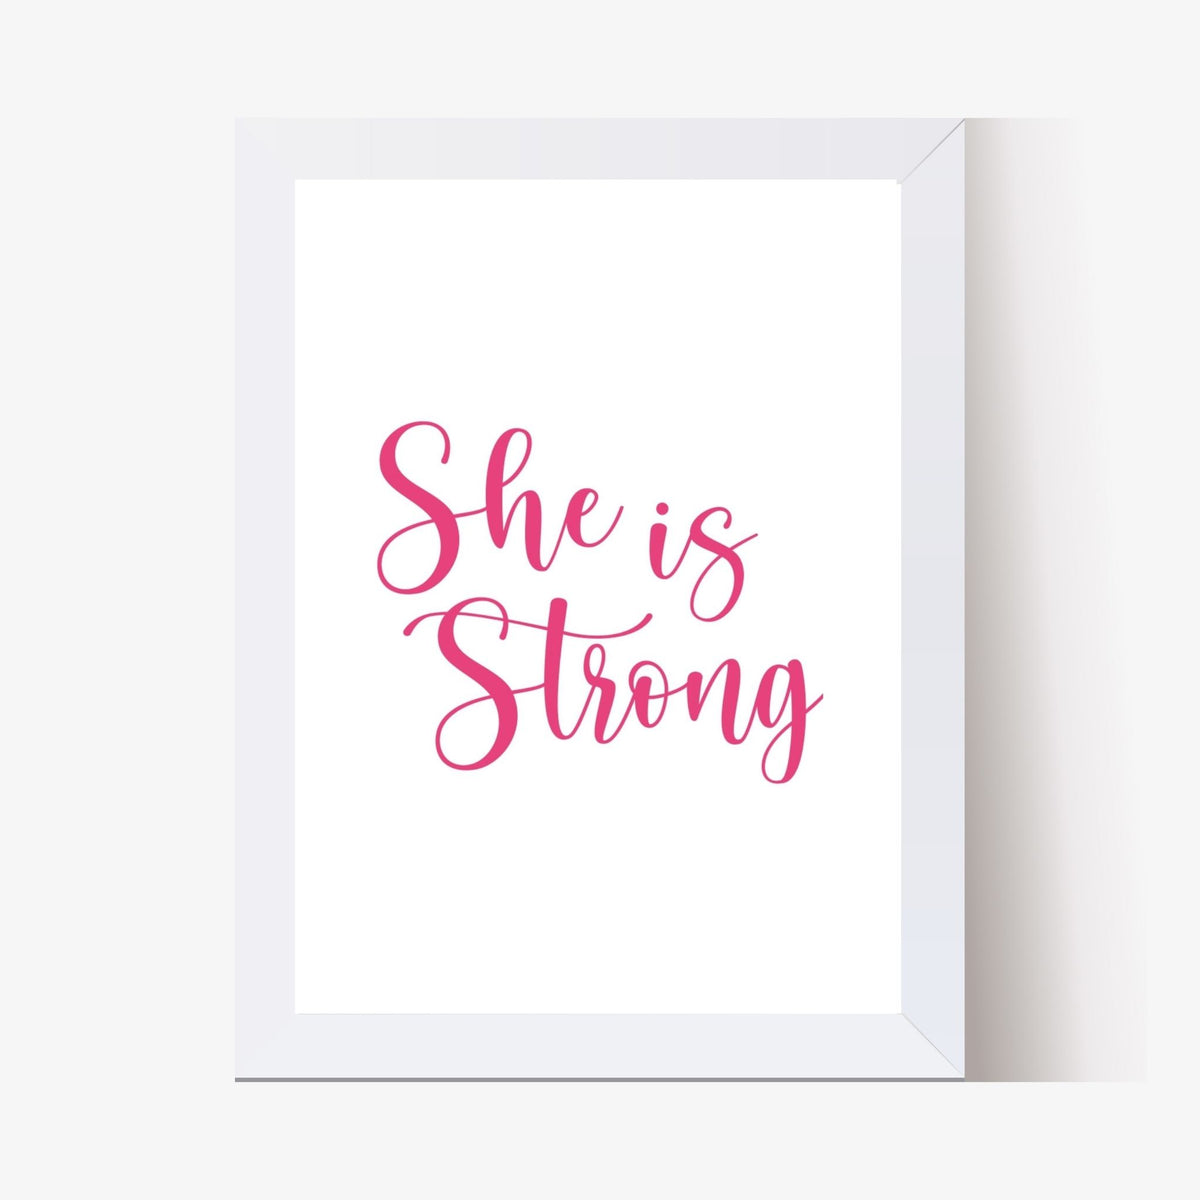 She is Strong (Digital Print)